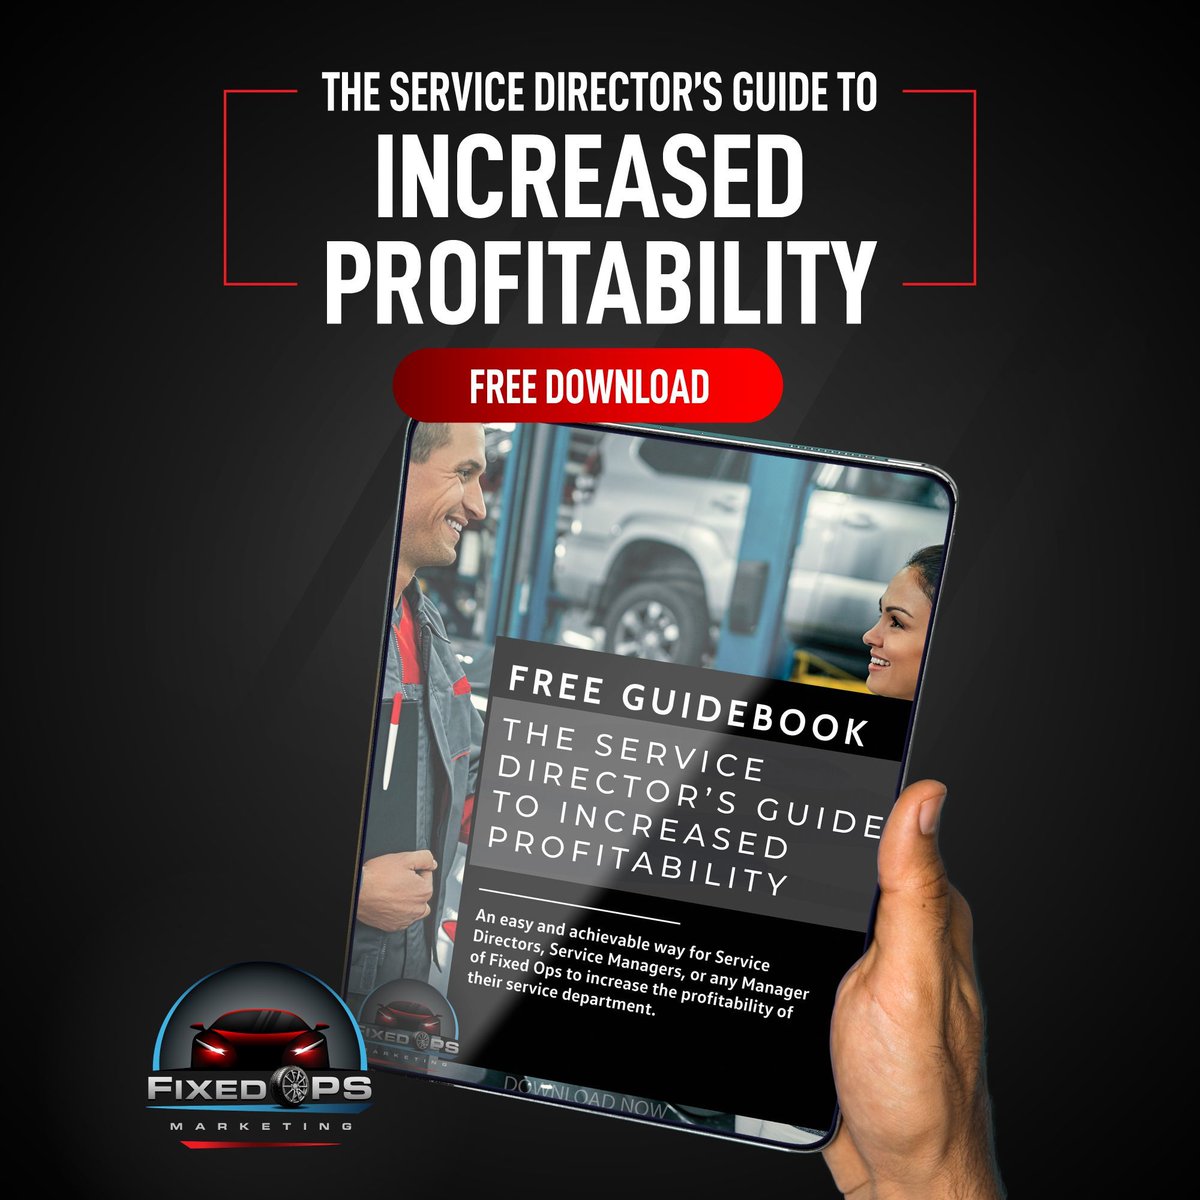 The Fixed Ops Manager's Guide to Increased Profitability! 💥 

✅ Team Goals
✅Customer Referrals
✅Rewards Program
✅Team Competition
✅Loyalty Programs
✅Resources

DOWNLOAD NOW👇 

lnkd.in/eZAuV37 

{hashtag|\#|Fixedops}